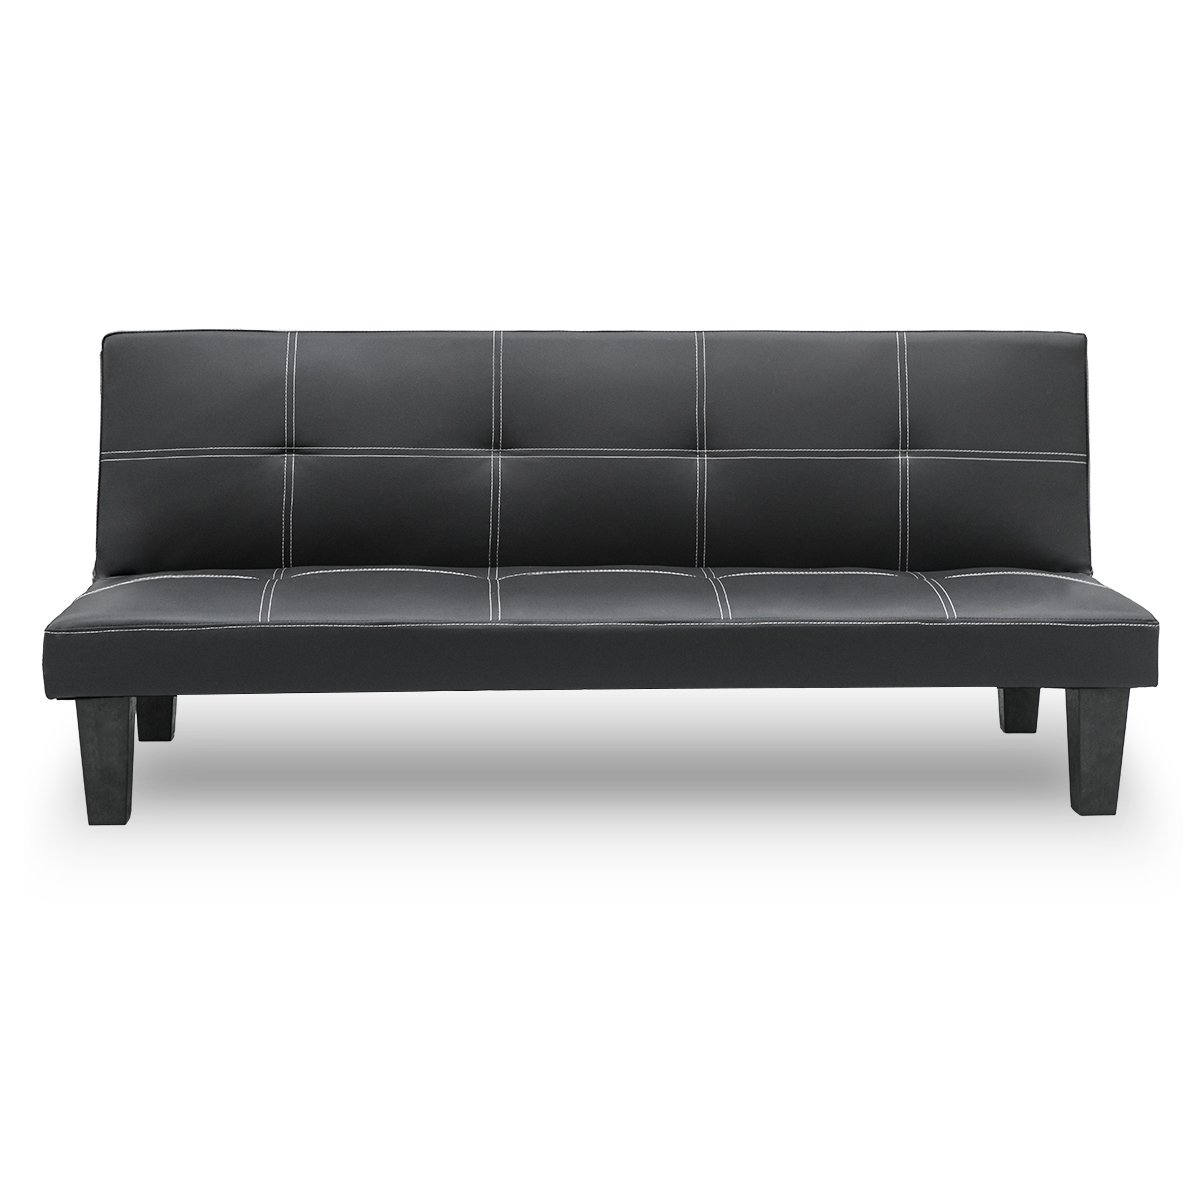 Sarantino 2 Seater Modular Faux Leather Fabric Sofa Bed Couch - Black 1